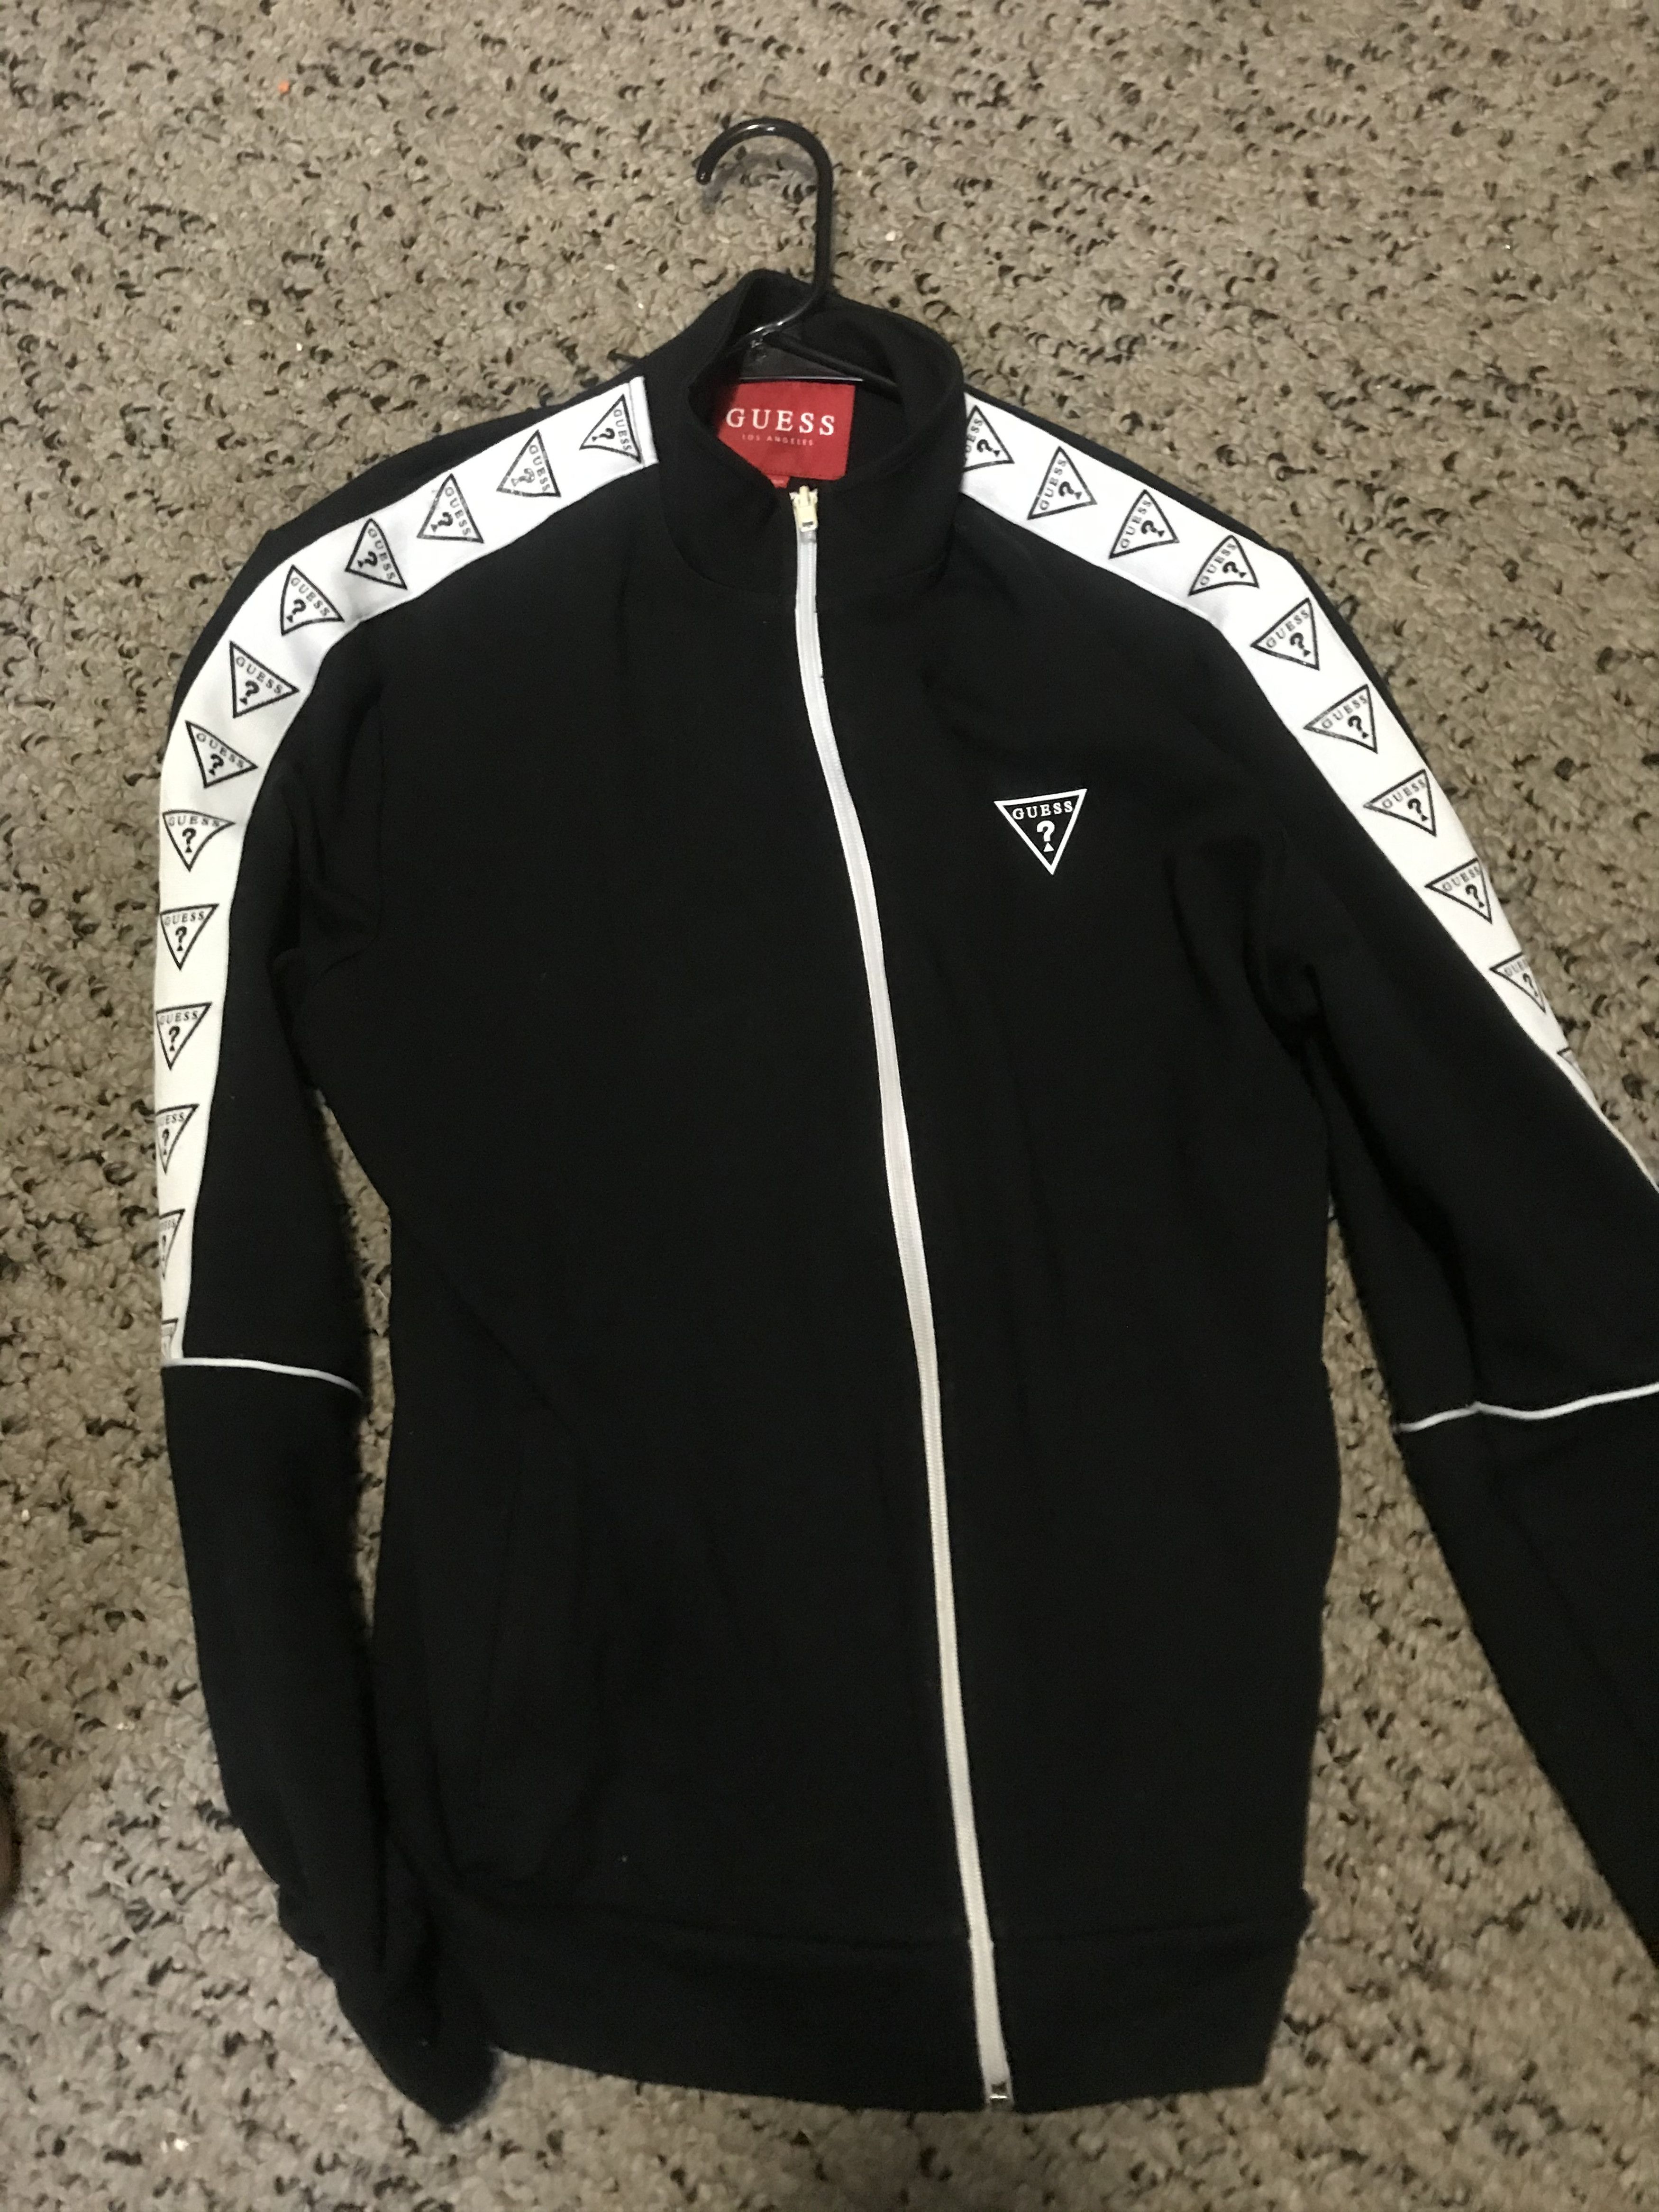 Guess guess tracksuit | Grailed